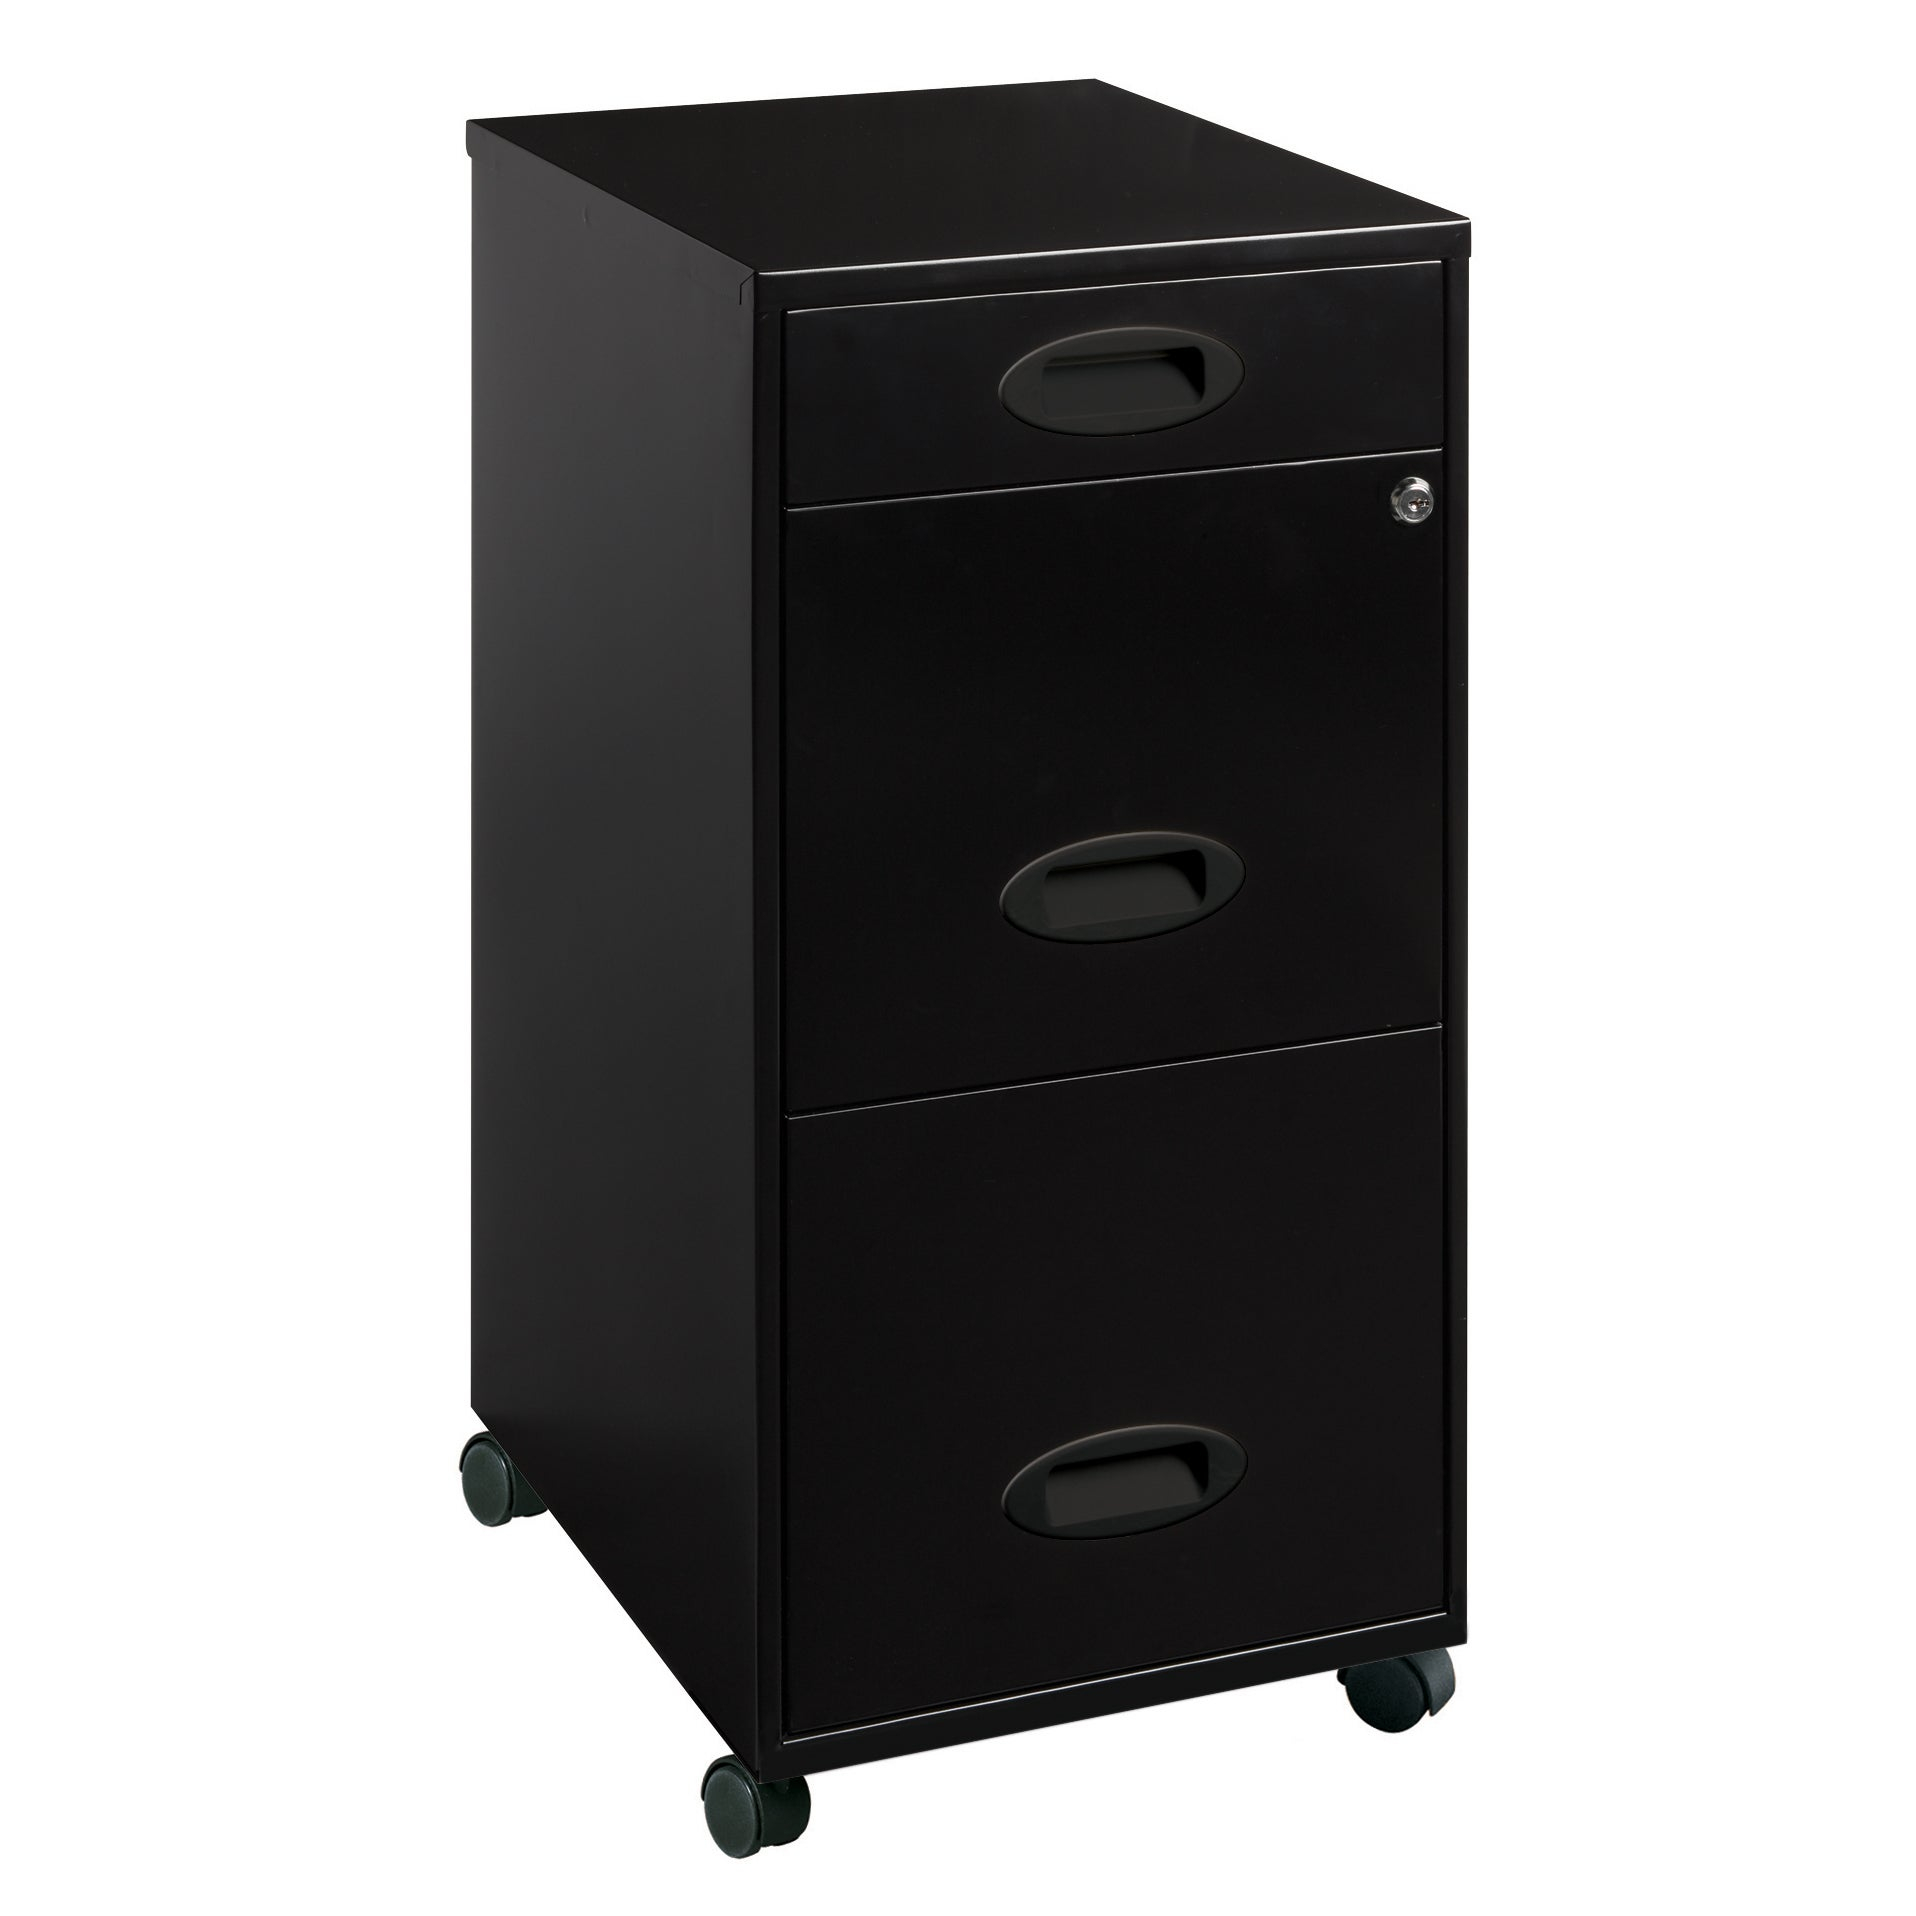 Space Solutions Black 3 Drawer Mobile File Cabinet with regard to size 1916 X 1916